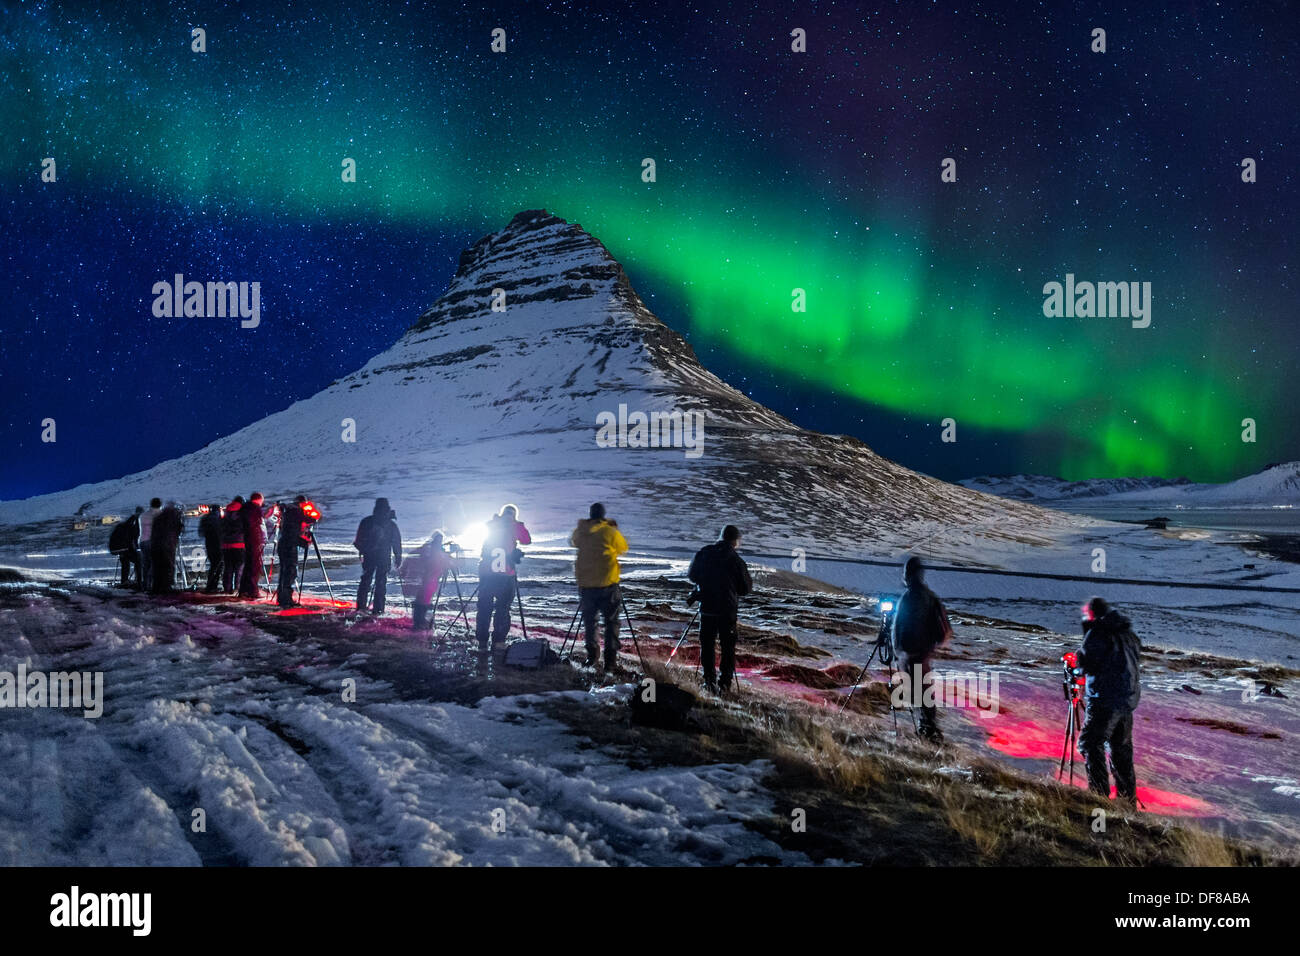 People taking pictures of the Aurora Borealis or Northern lights over Mt Kirkjufell, Snaefellsnes Peninsula, Iceland Stock Photo